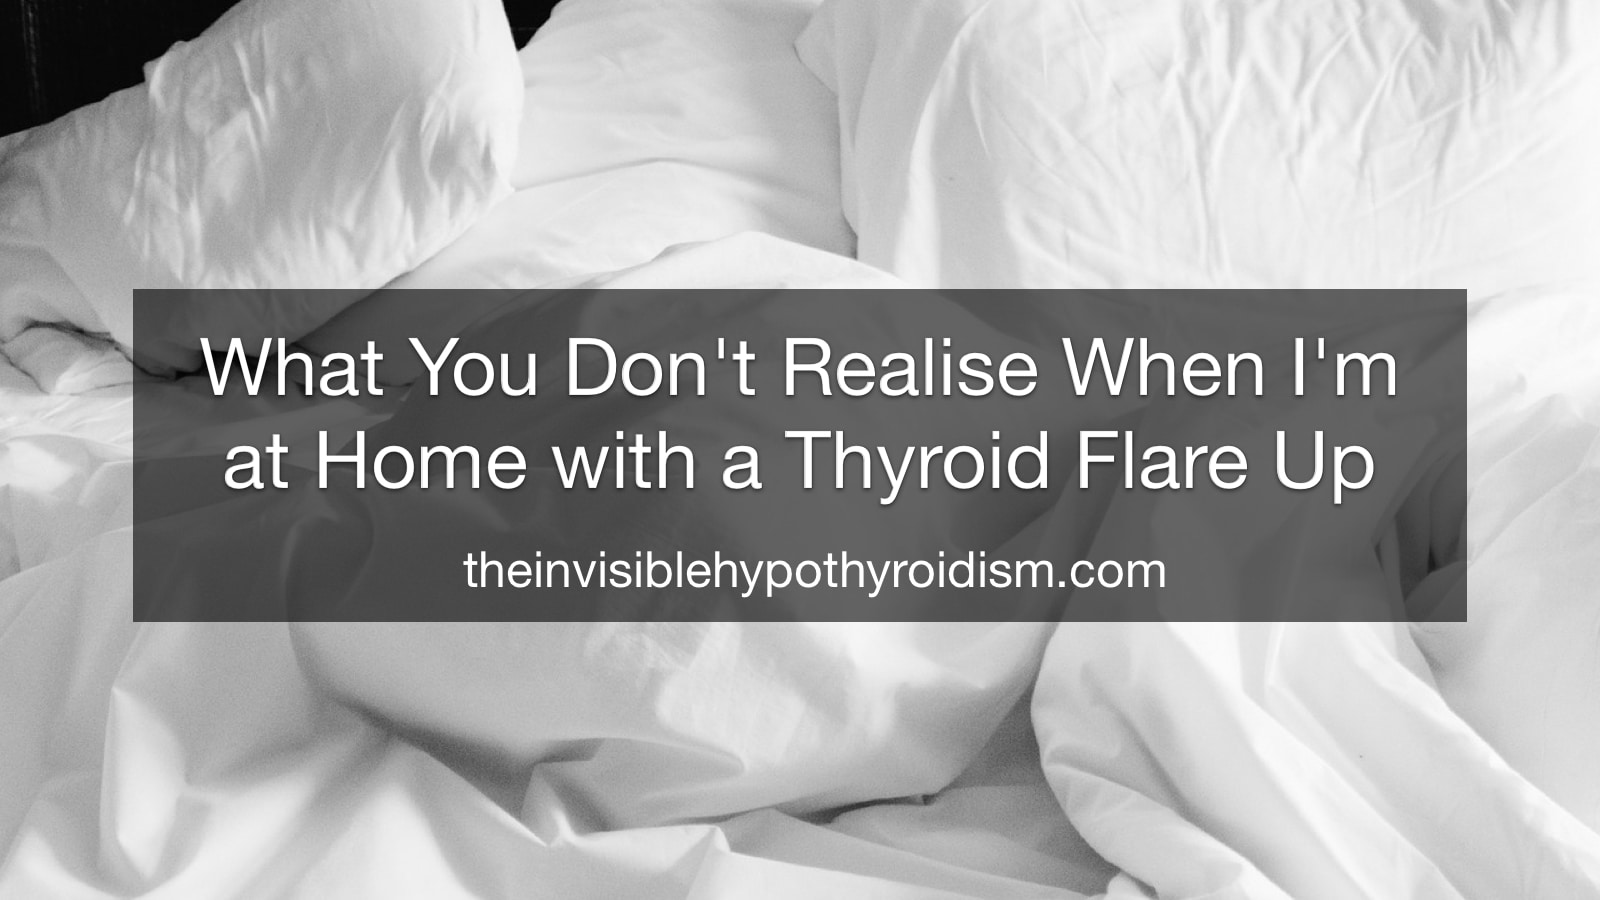 What You Don't Realise When I'm at Home with a Thyroid Flare Up